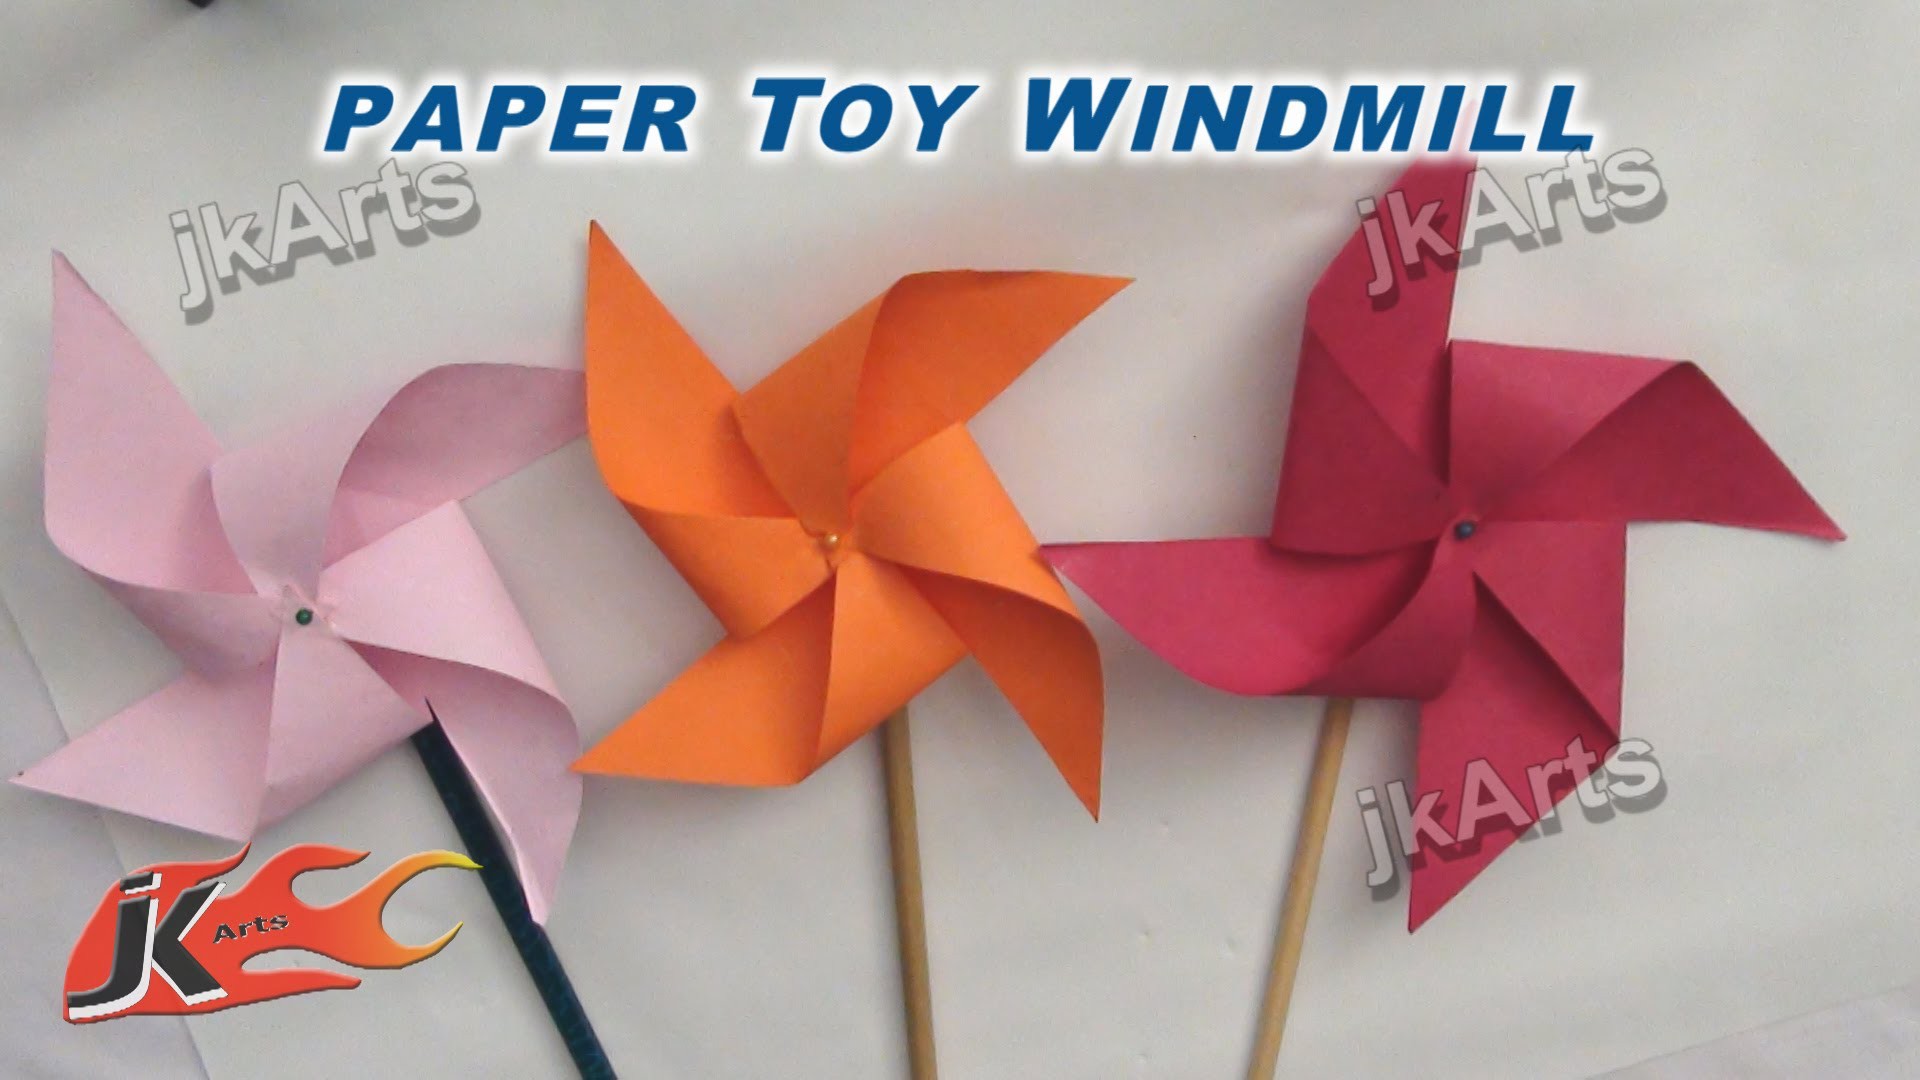 DIY How to make Paper Toy Windmill (Easy craft for kids) - JK Arts 256